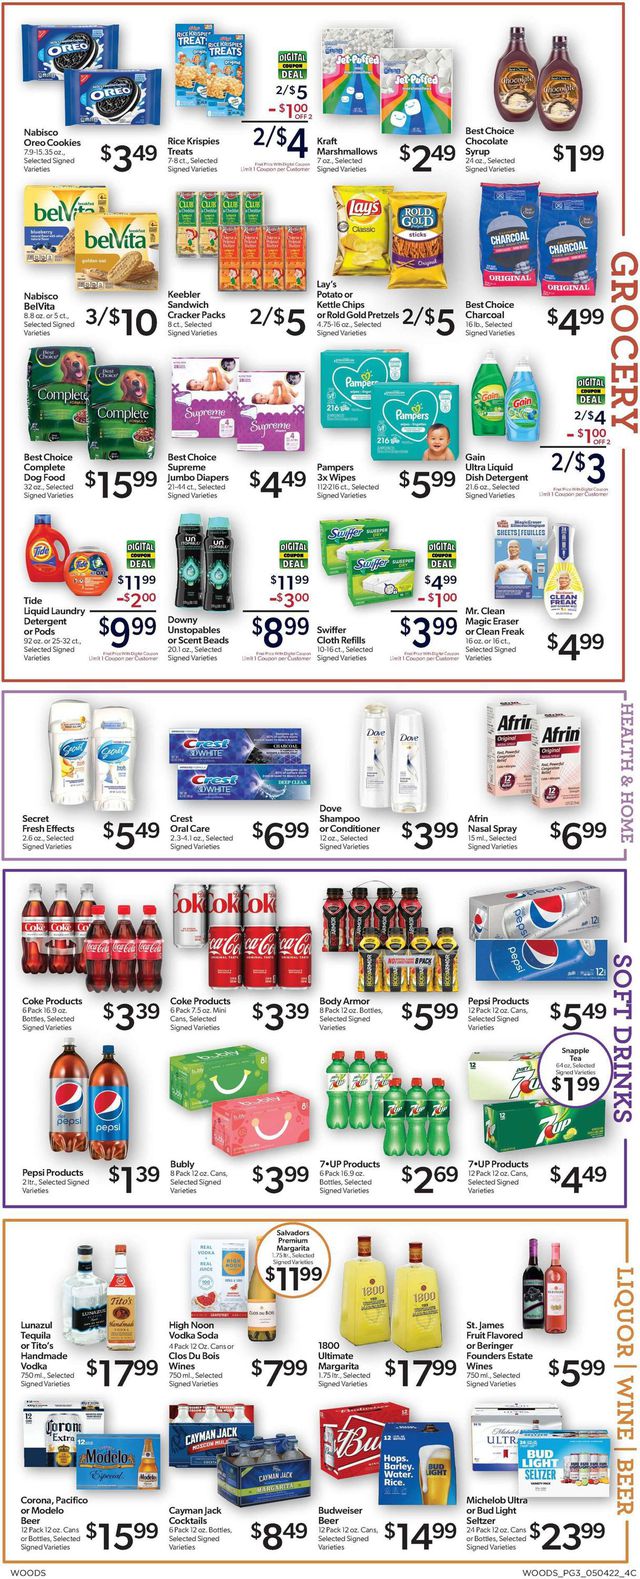 Woods Supermarket Ad from 05/04/2022